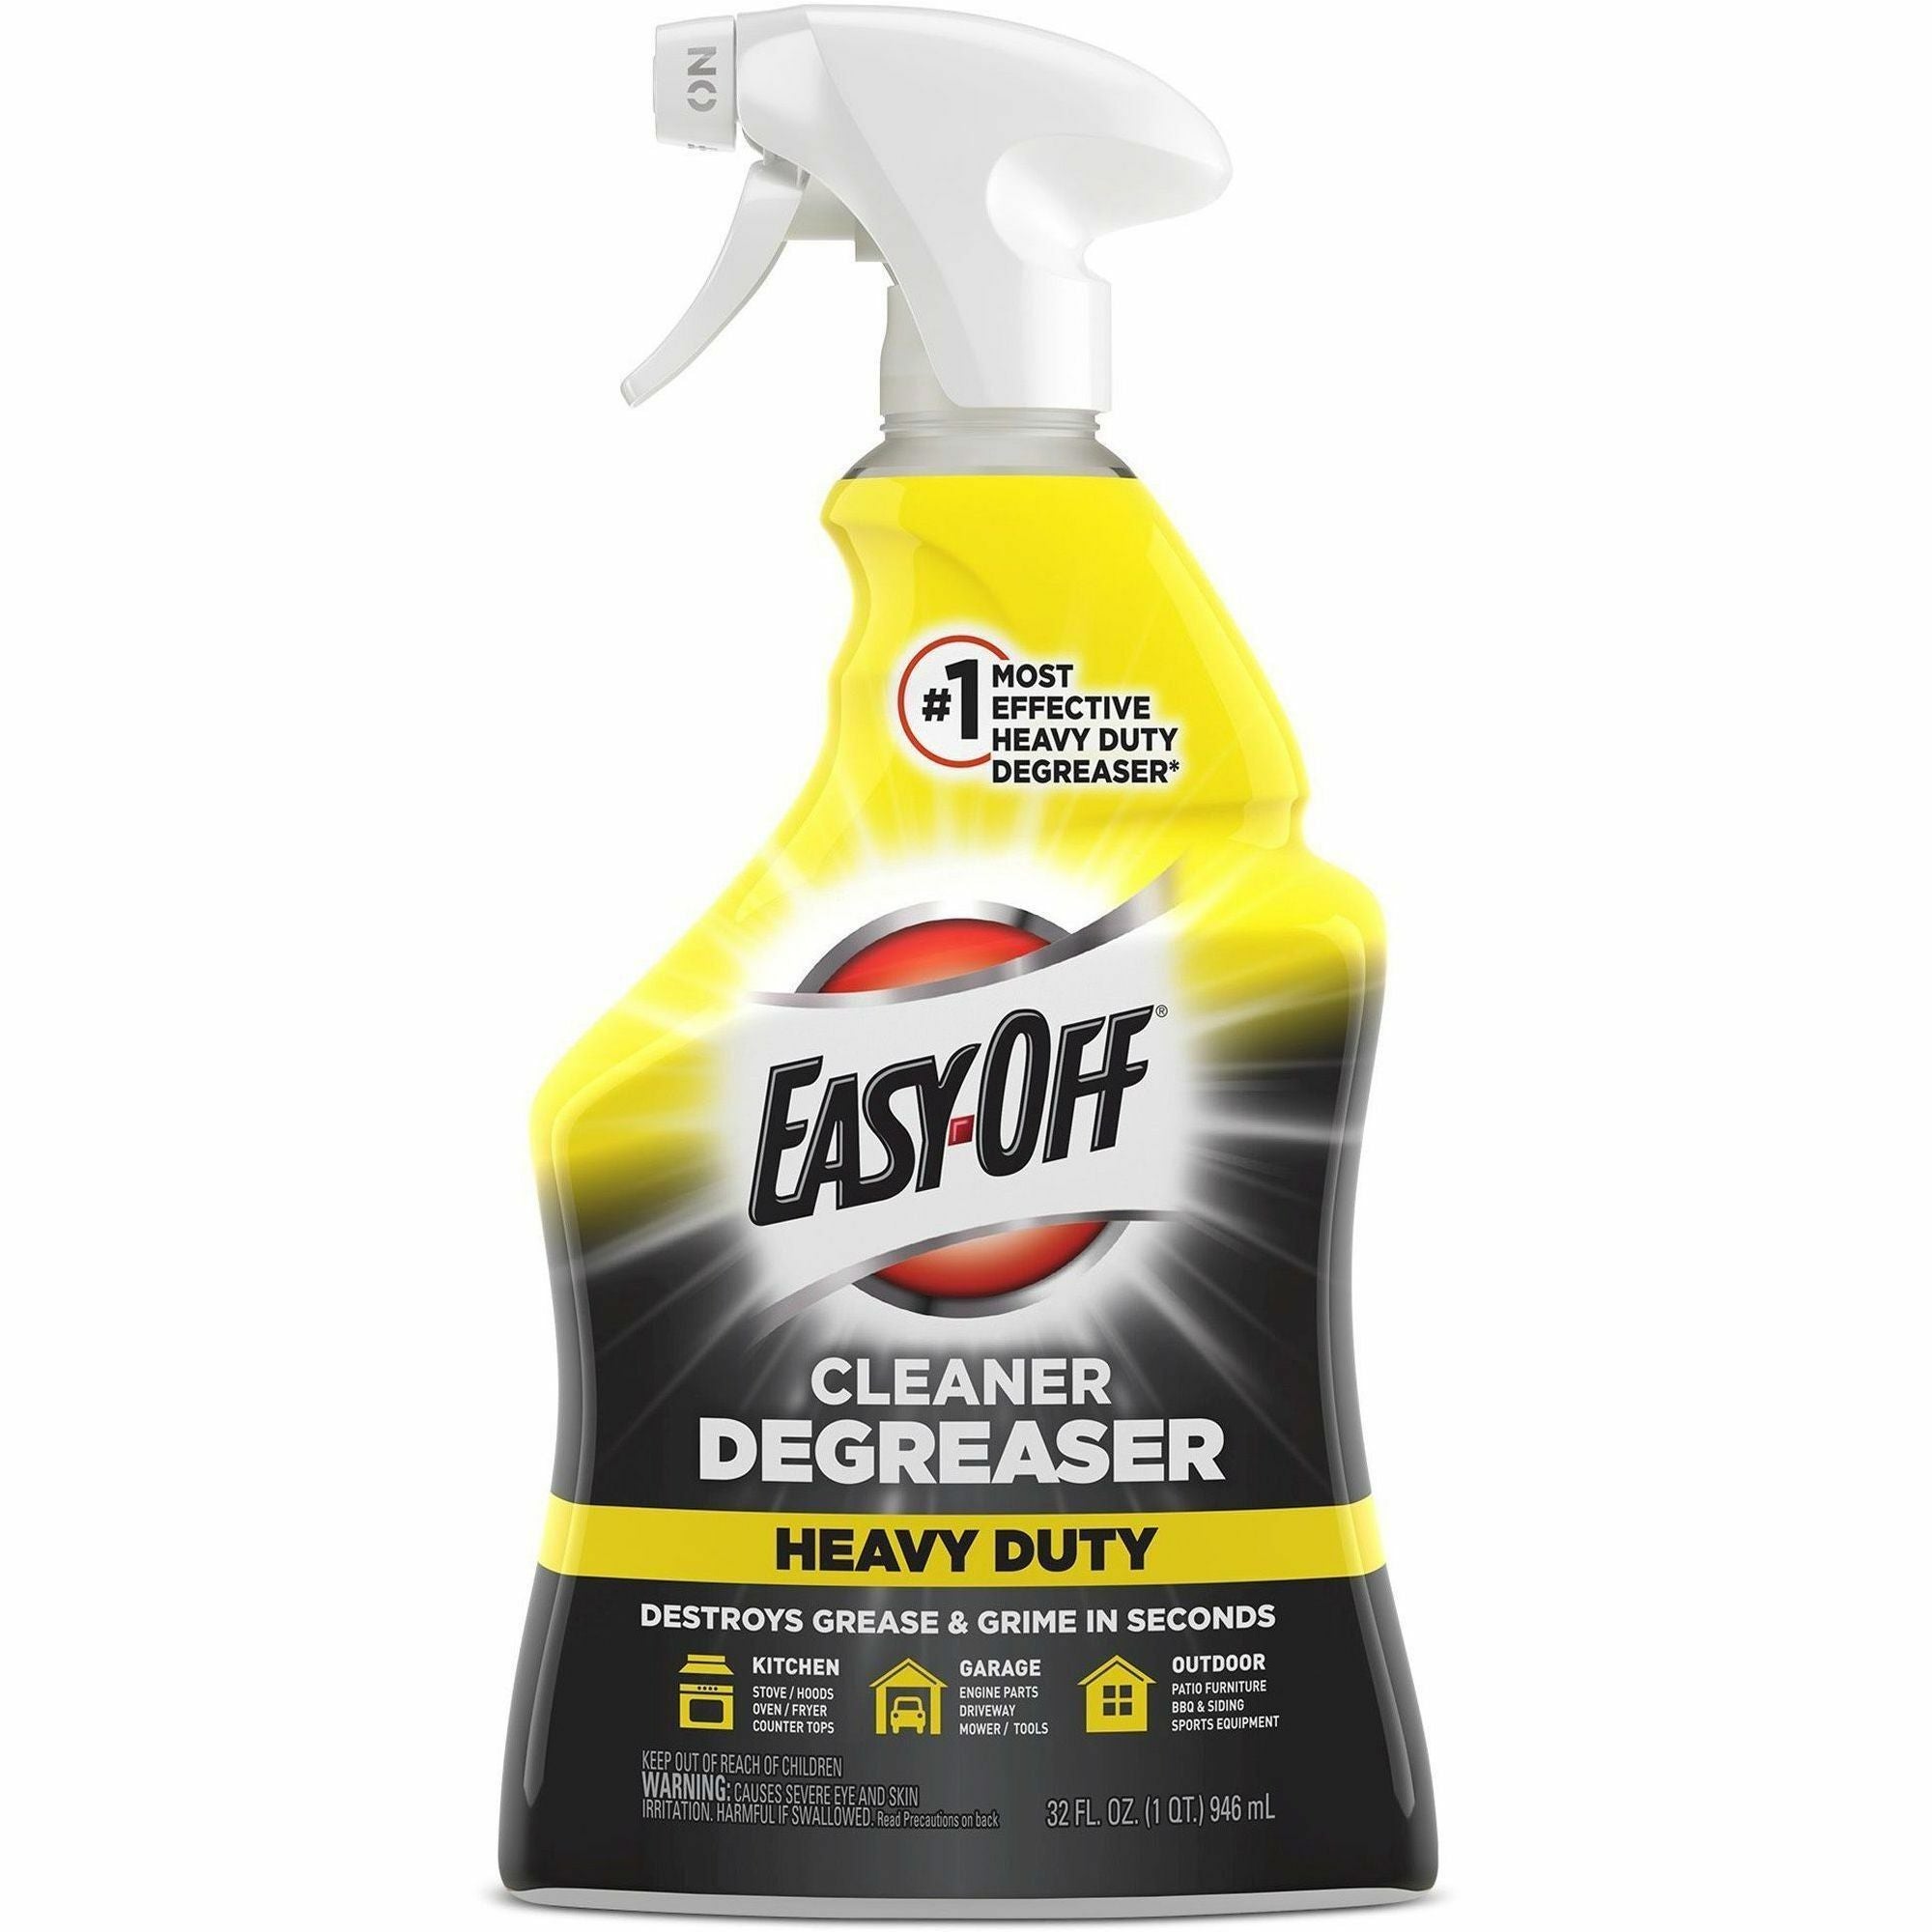 easy-off-cleaner-degreaser-ready-to-use-32-fl-oz-1-quart-6-carton-heavy-duty-clear_rac99624ct - 2